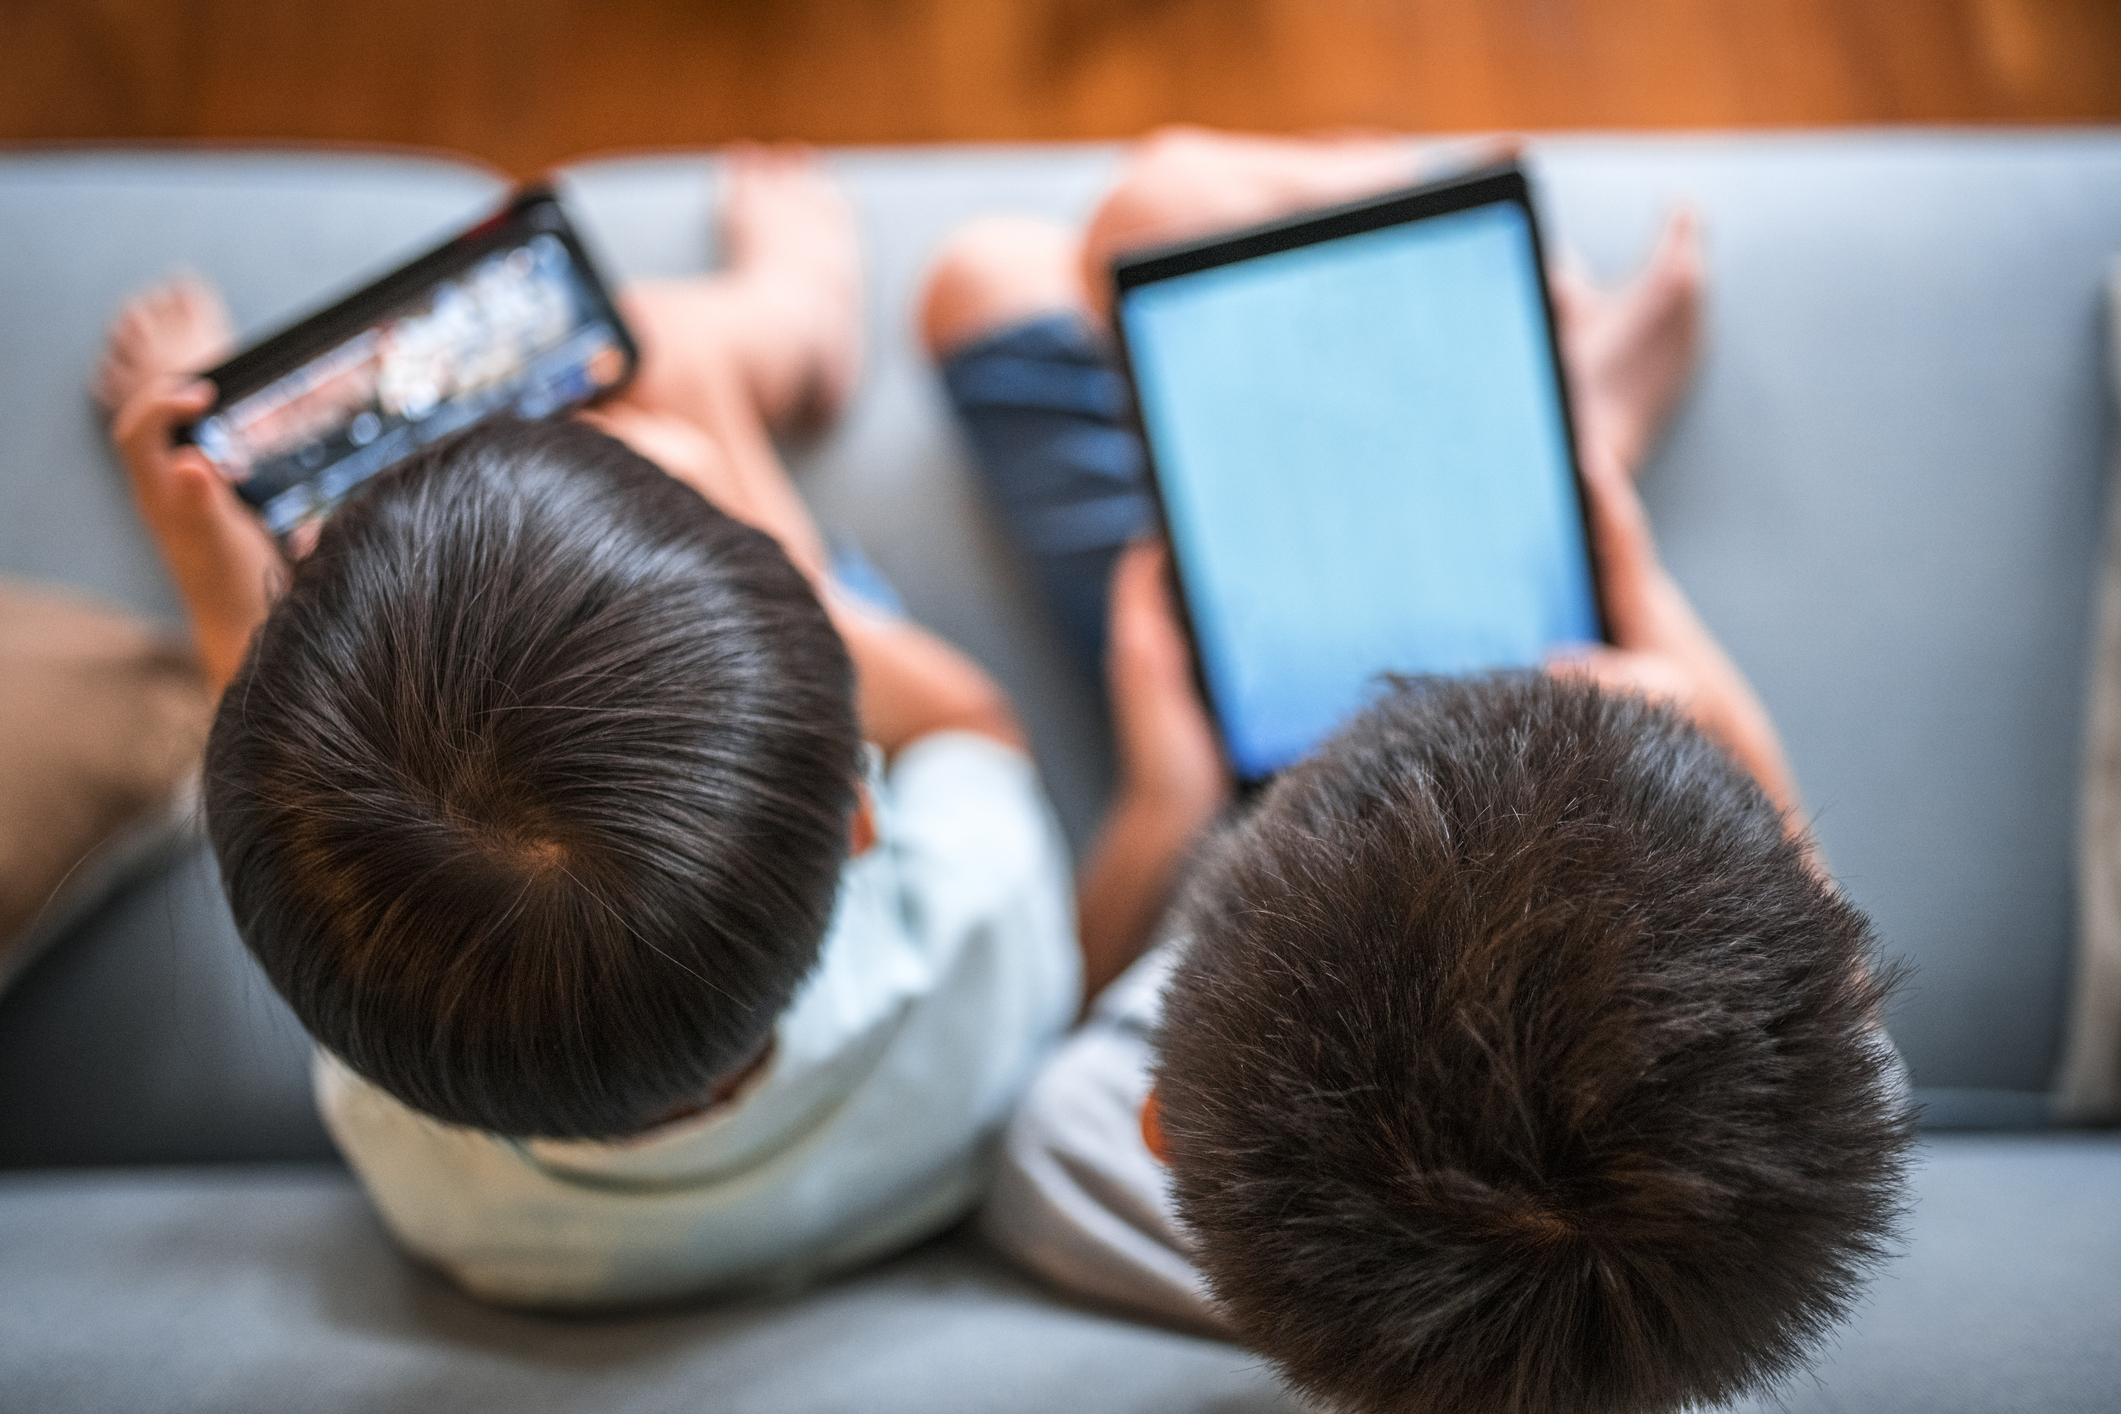 Boys using digital table and sitting on a sofa